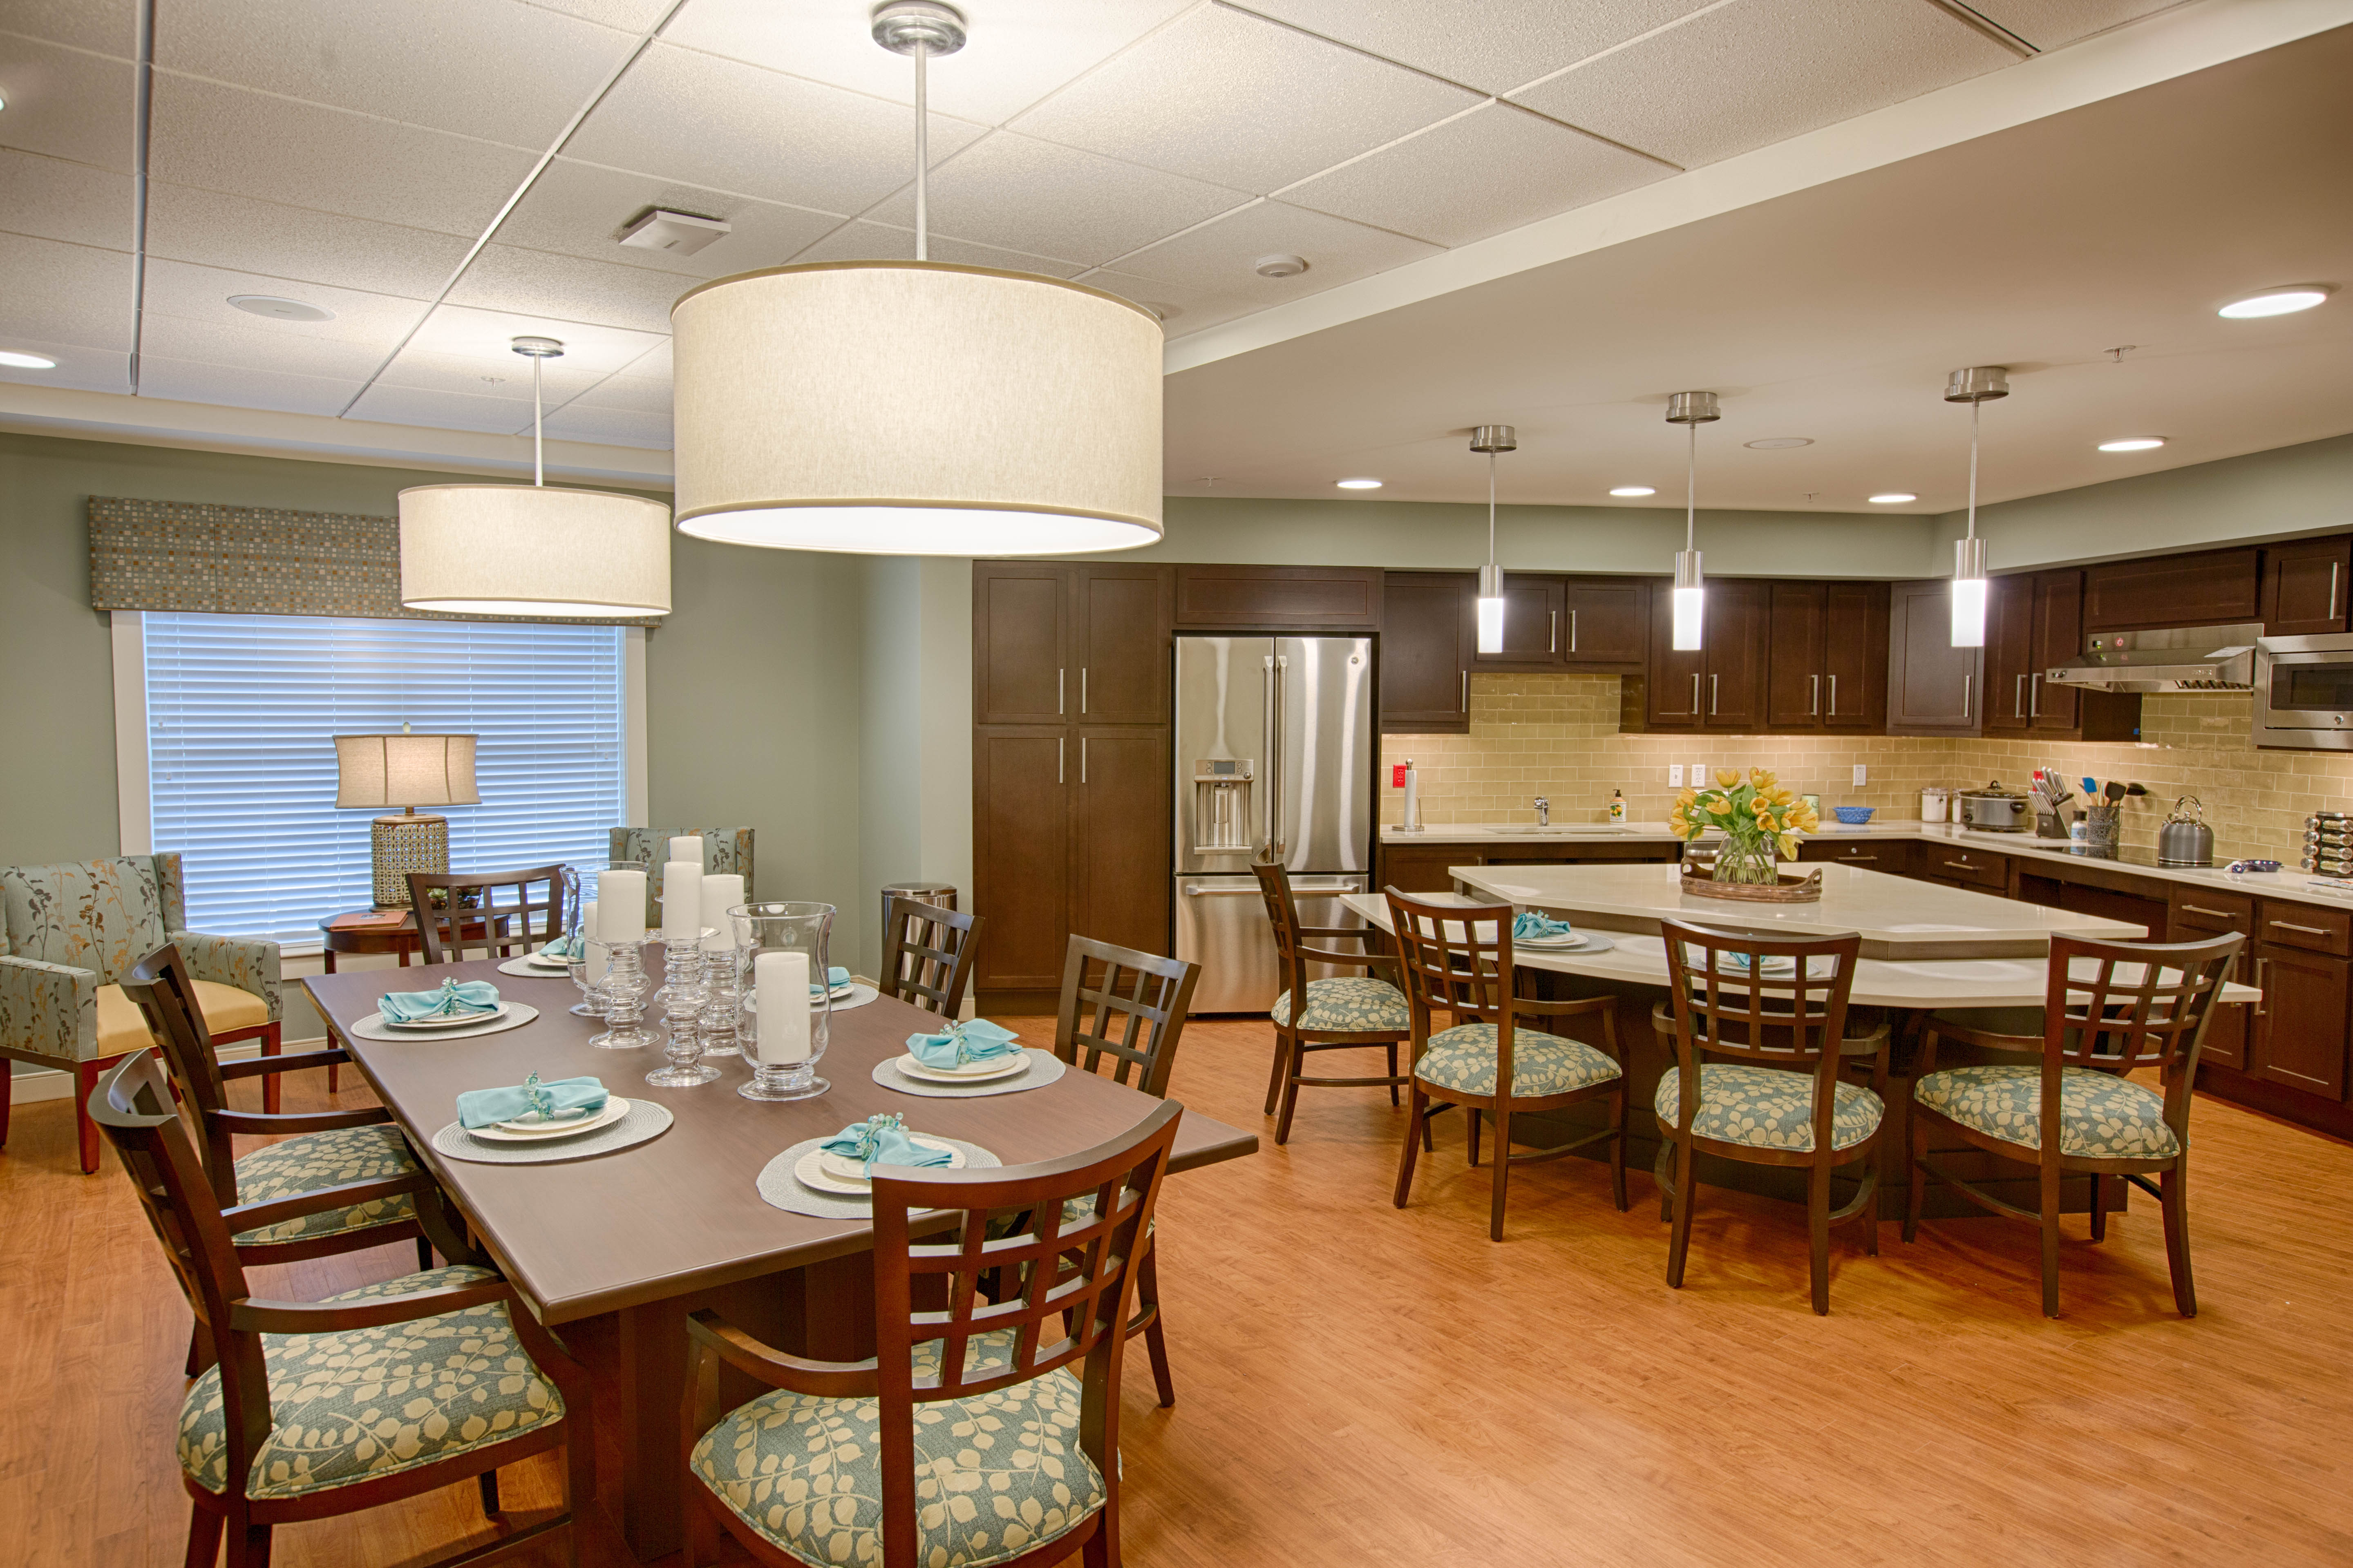 The Branches offers a family dining room where residents can celebrate birthdays and holidays and connect with friends and loved ones. Photo courtesy of David Udelsman.